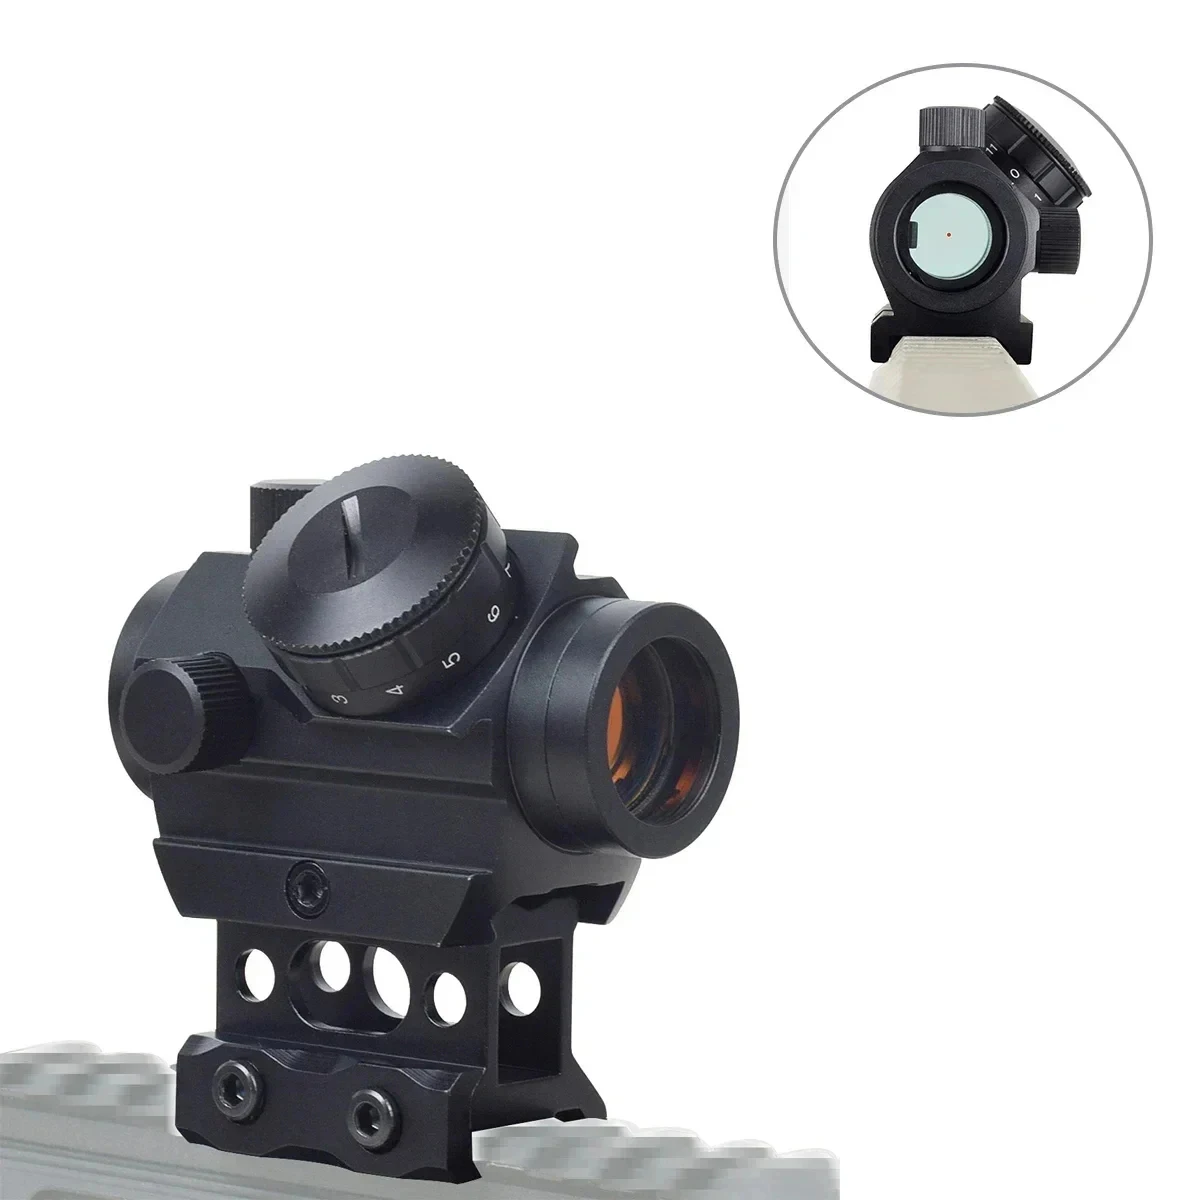 Tactical 1x20 2MOA Red Dot Sight Scope Holographic Reflex With 1 inch Riser Mount 20mm Rail For Airsoft Hunting Gun Accessories